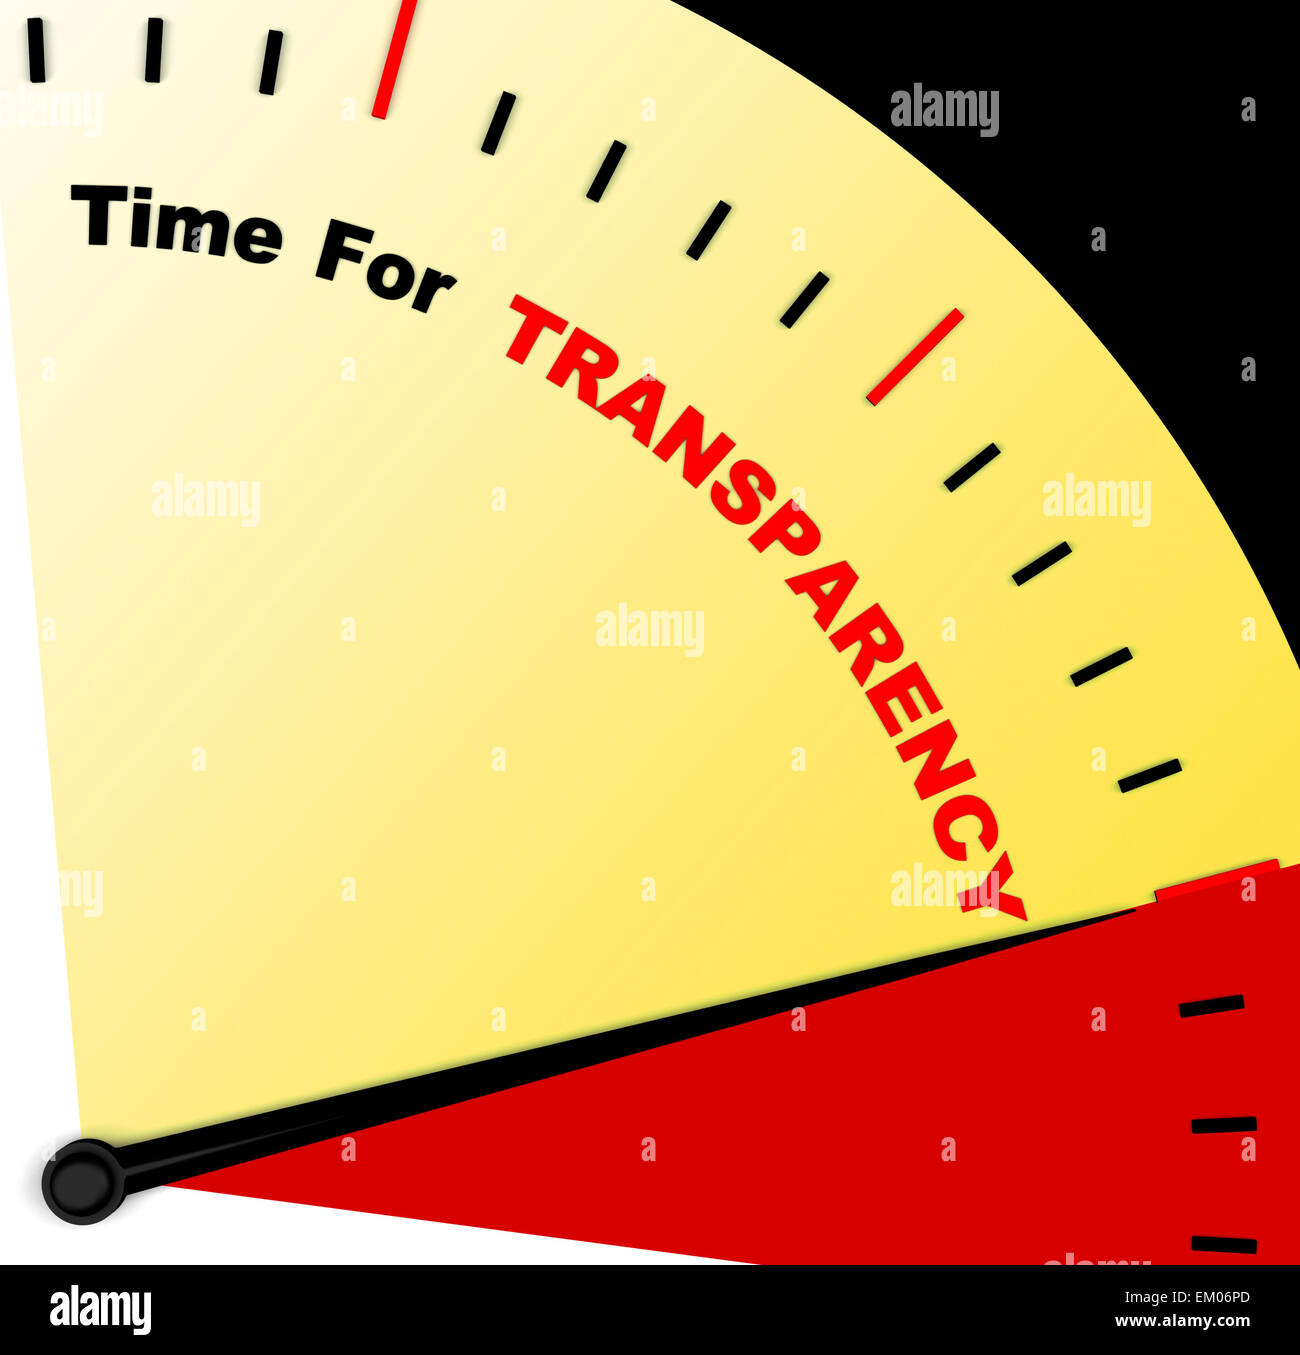 Time For Transparency Message Means Ethics And Fairness Stock Photo